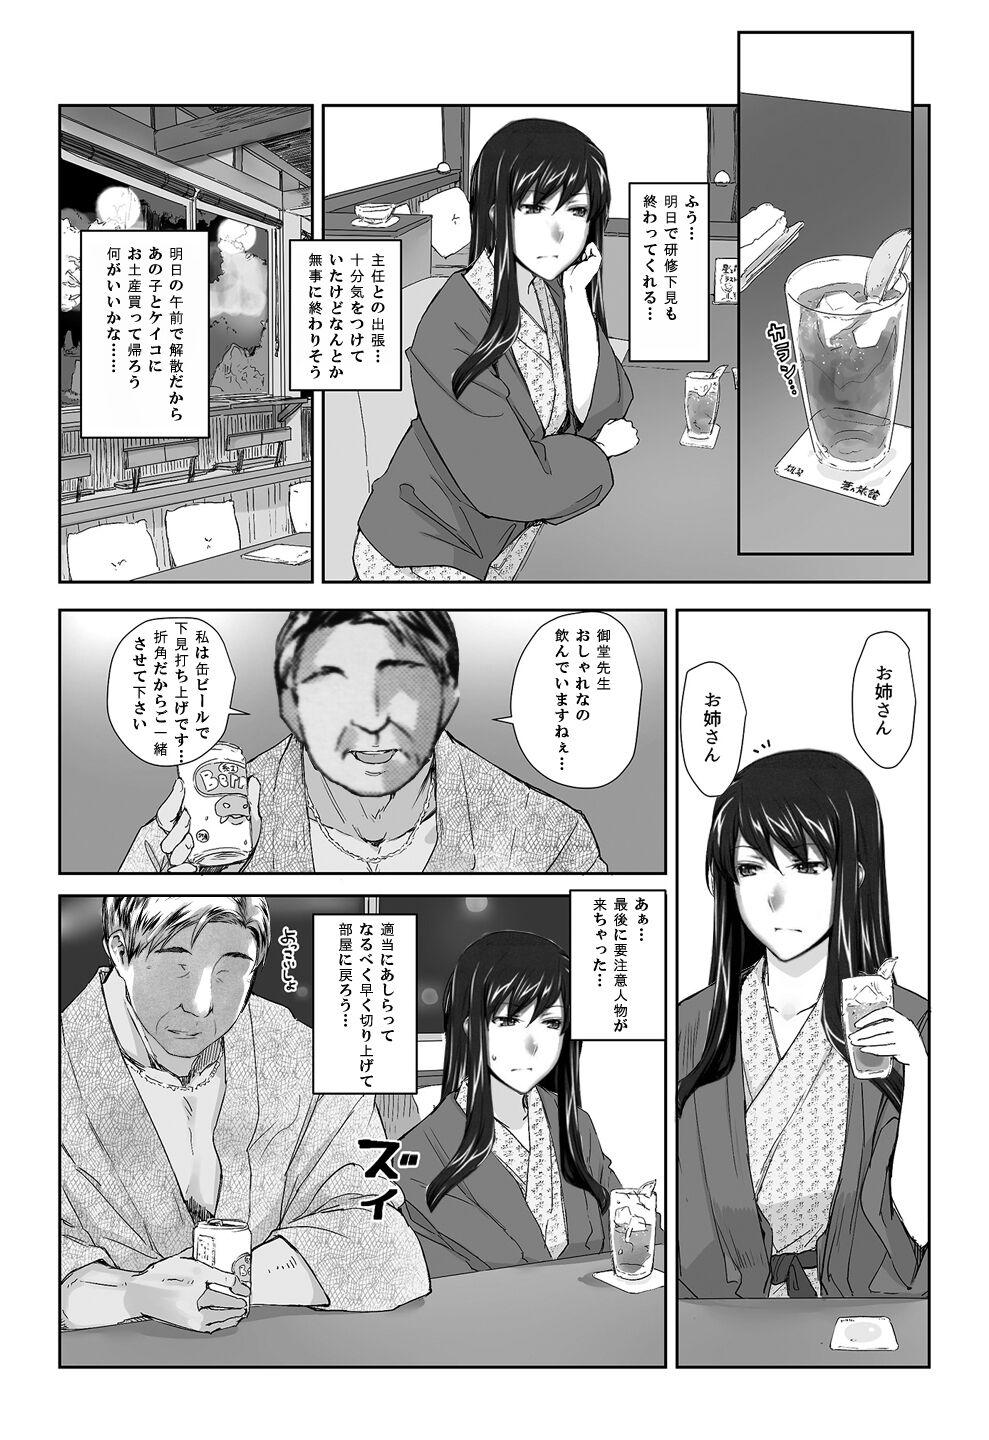 Gaygroupsex Sakiko-san in delusion Vol.8 revised ~Sakiko-san's circumstance at an educational training Route3~ (collage) (Continue to “First day of study trip” (page 42) of Vol.1) Gay Brownhair - Page 3